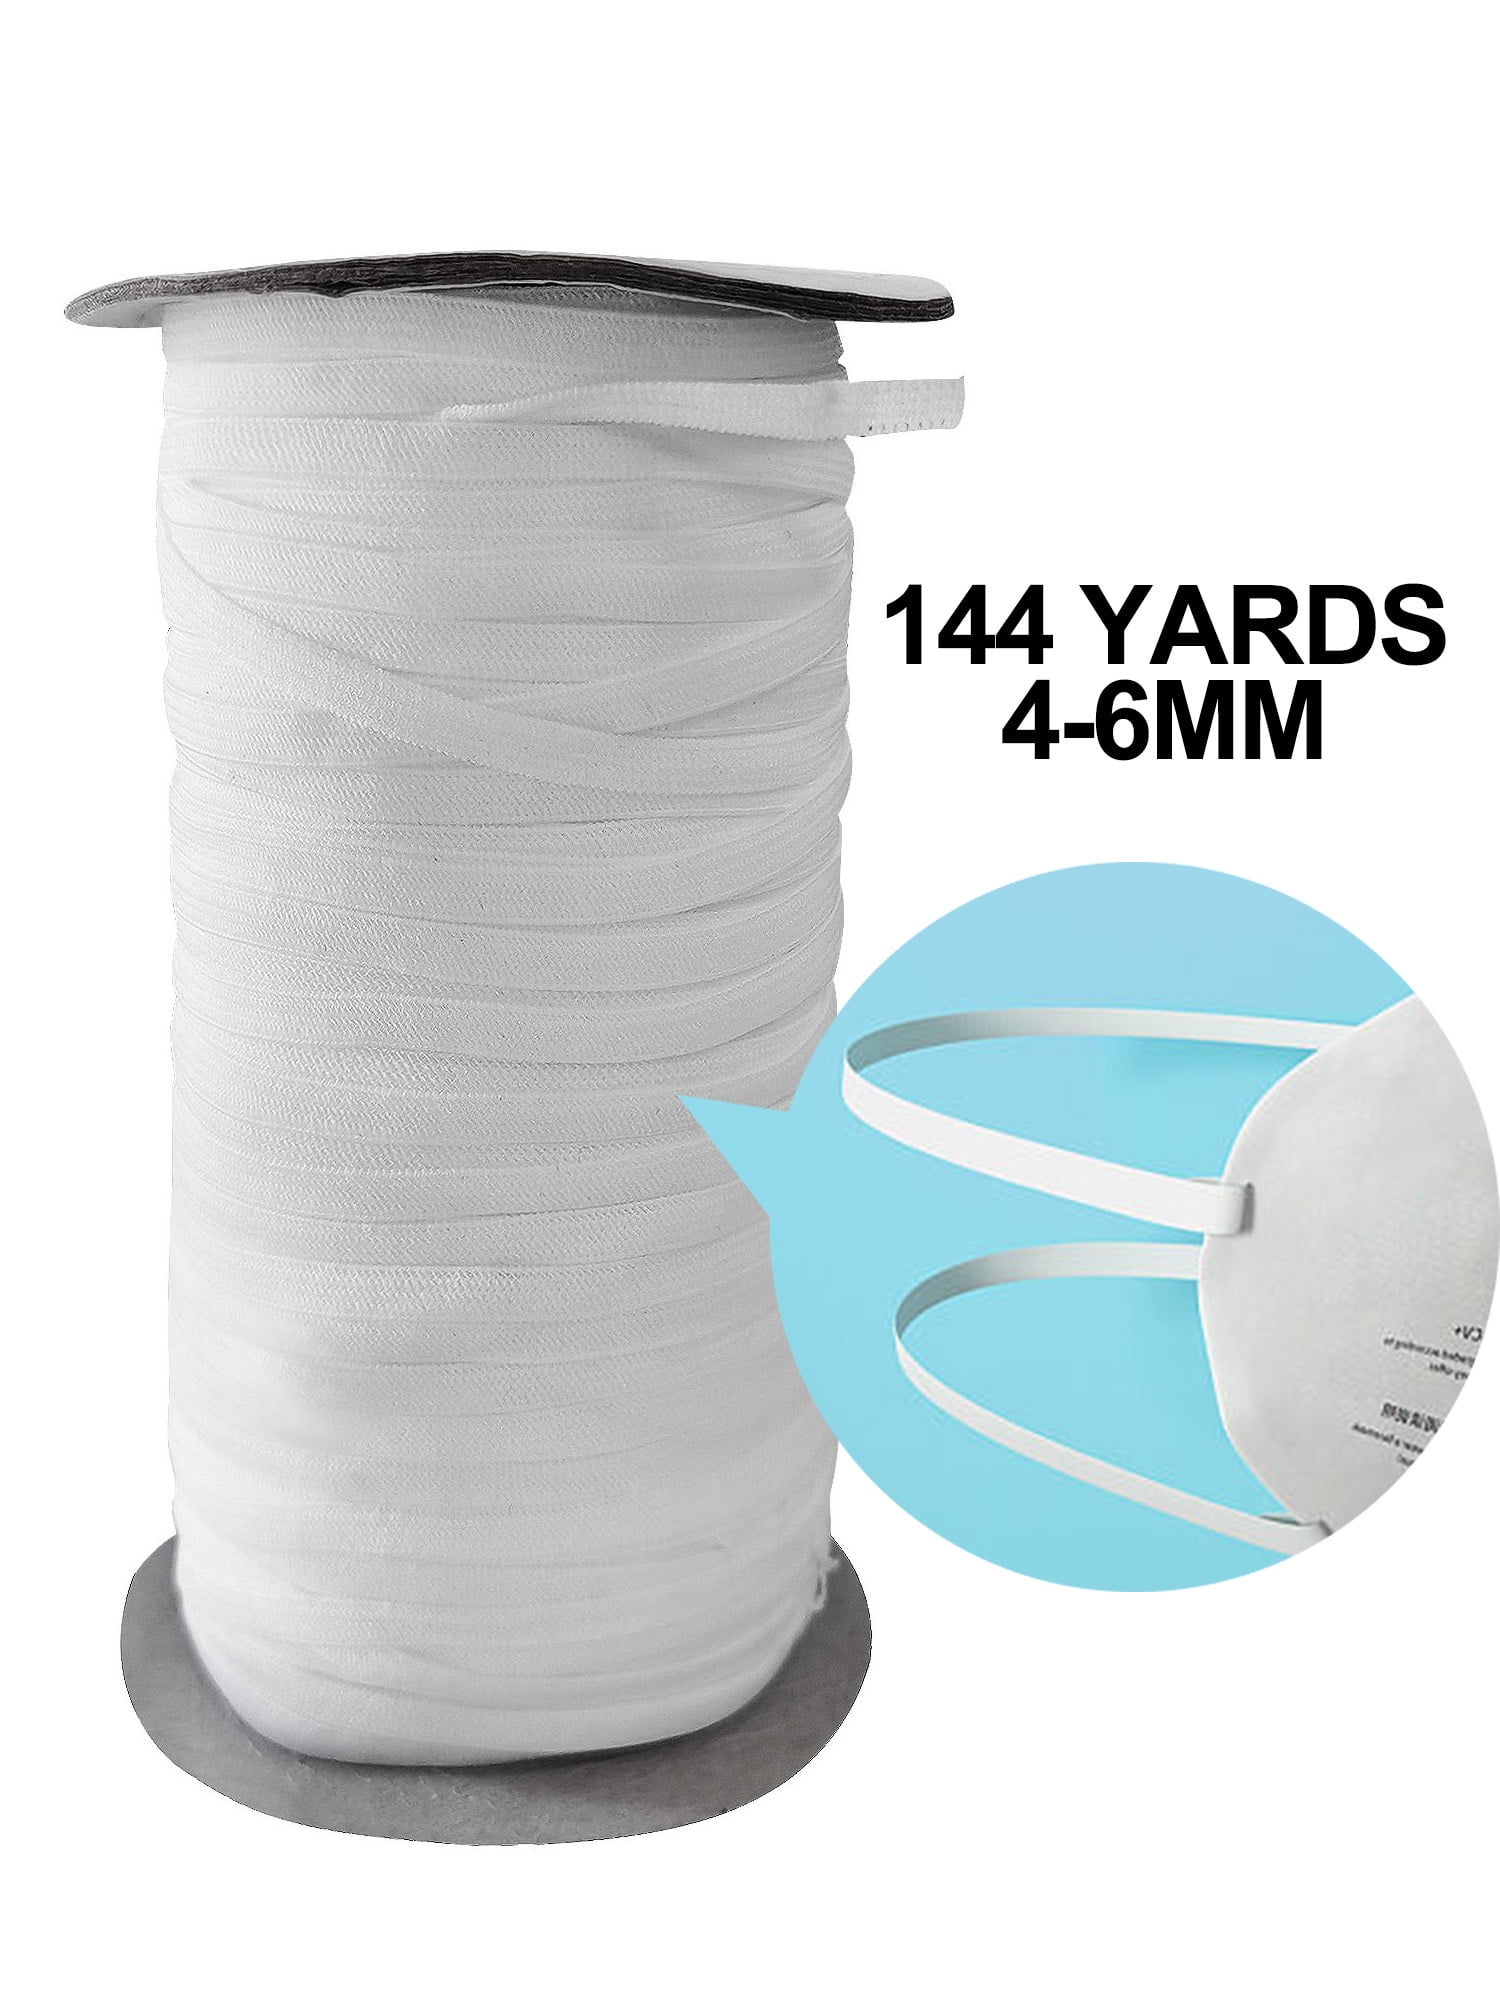 White 144Yards 1/4" Width Braided Strength Cord Band Elastic Rope Stretch Knit 